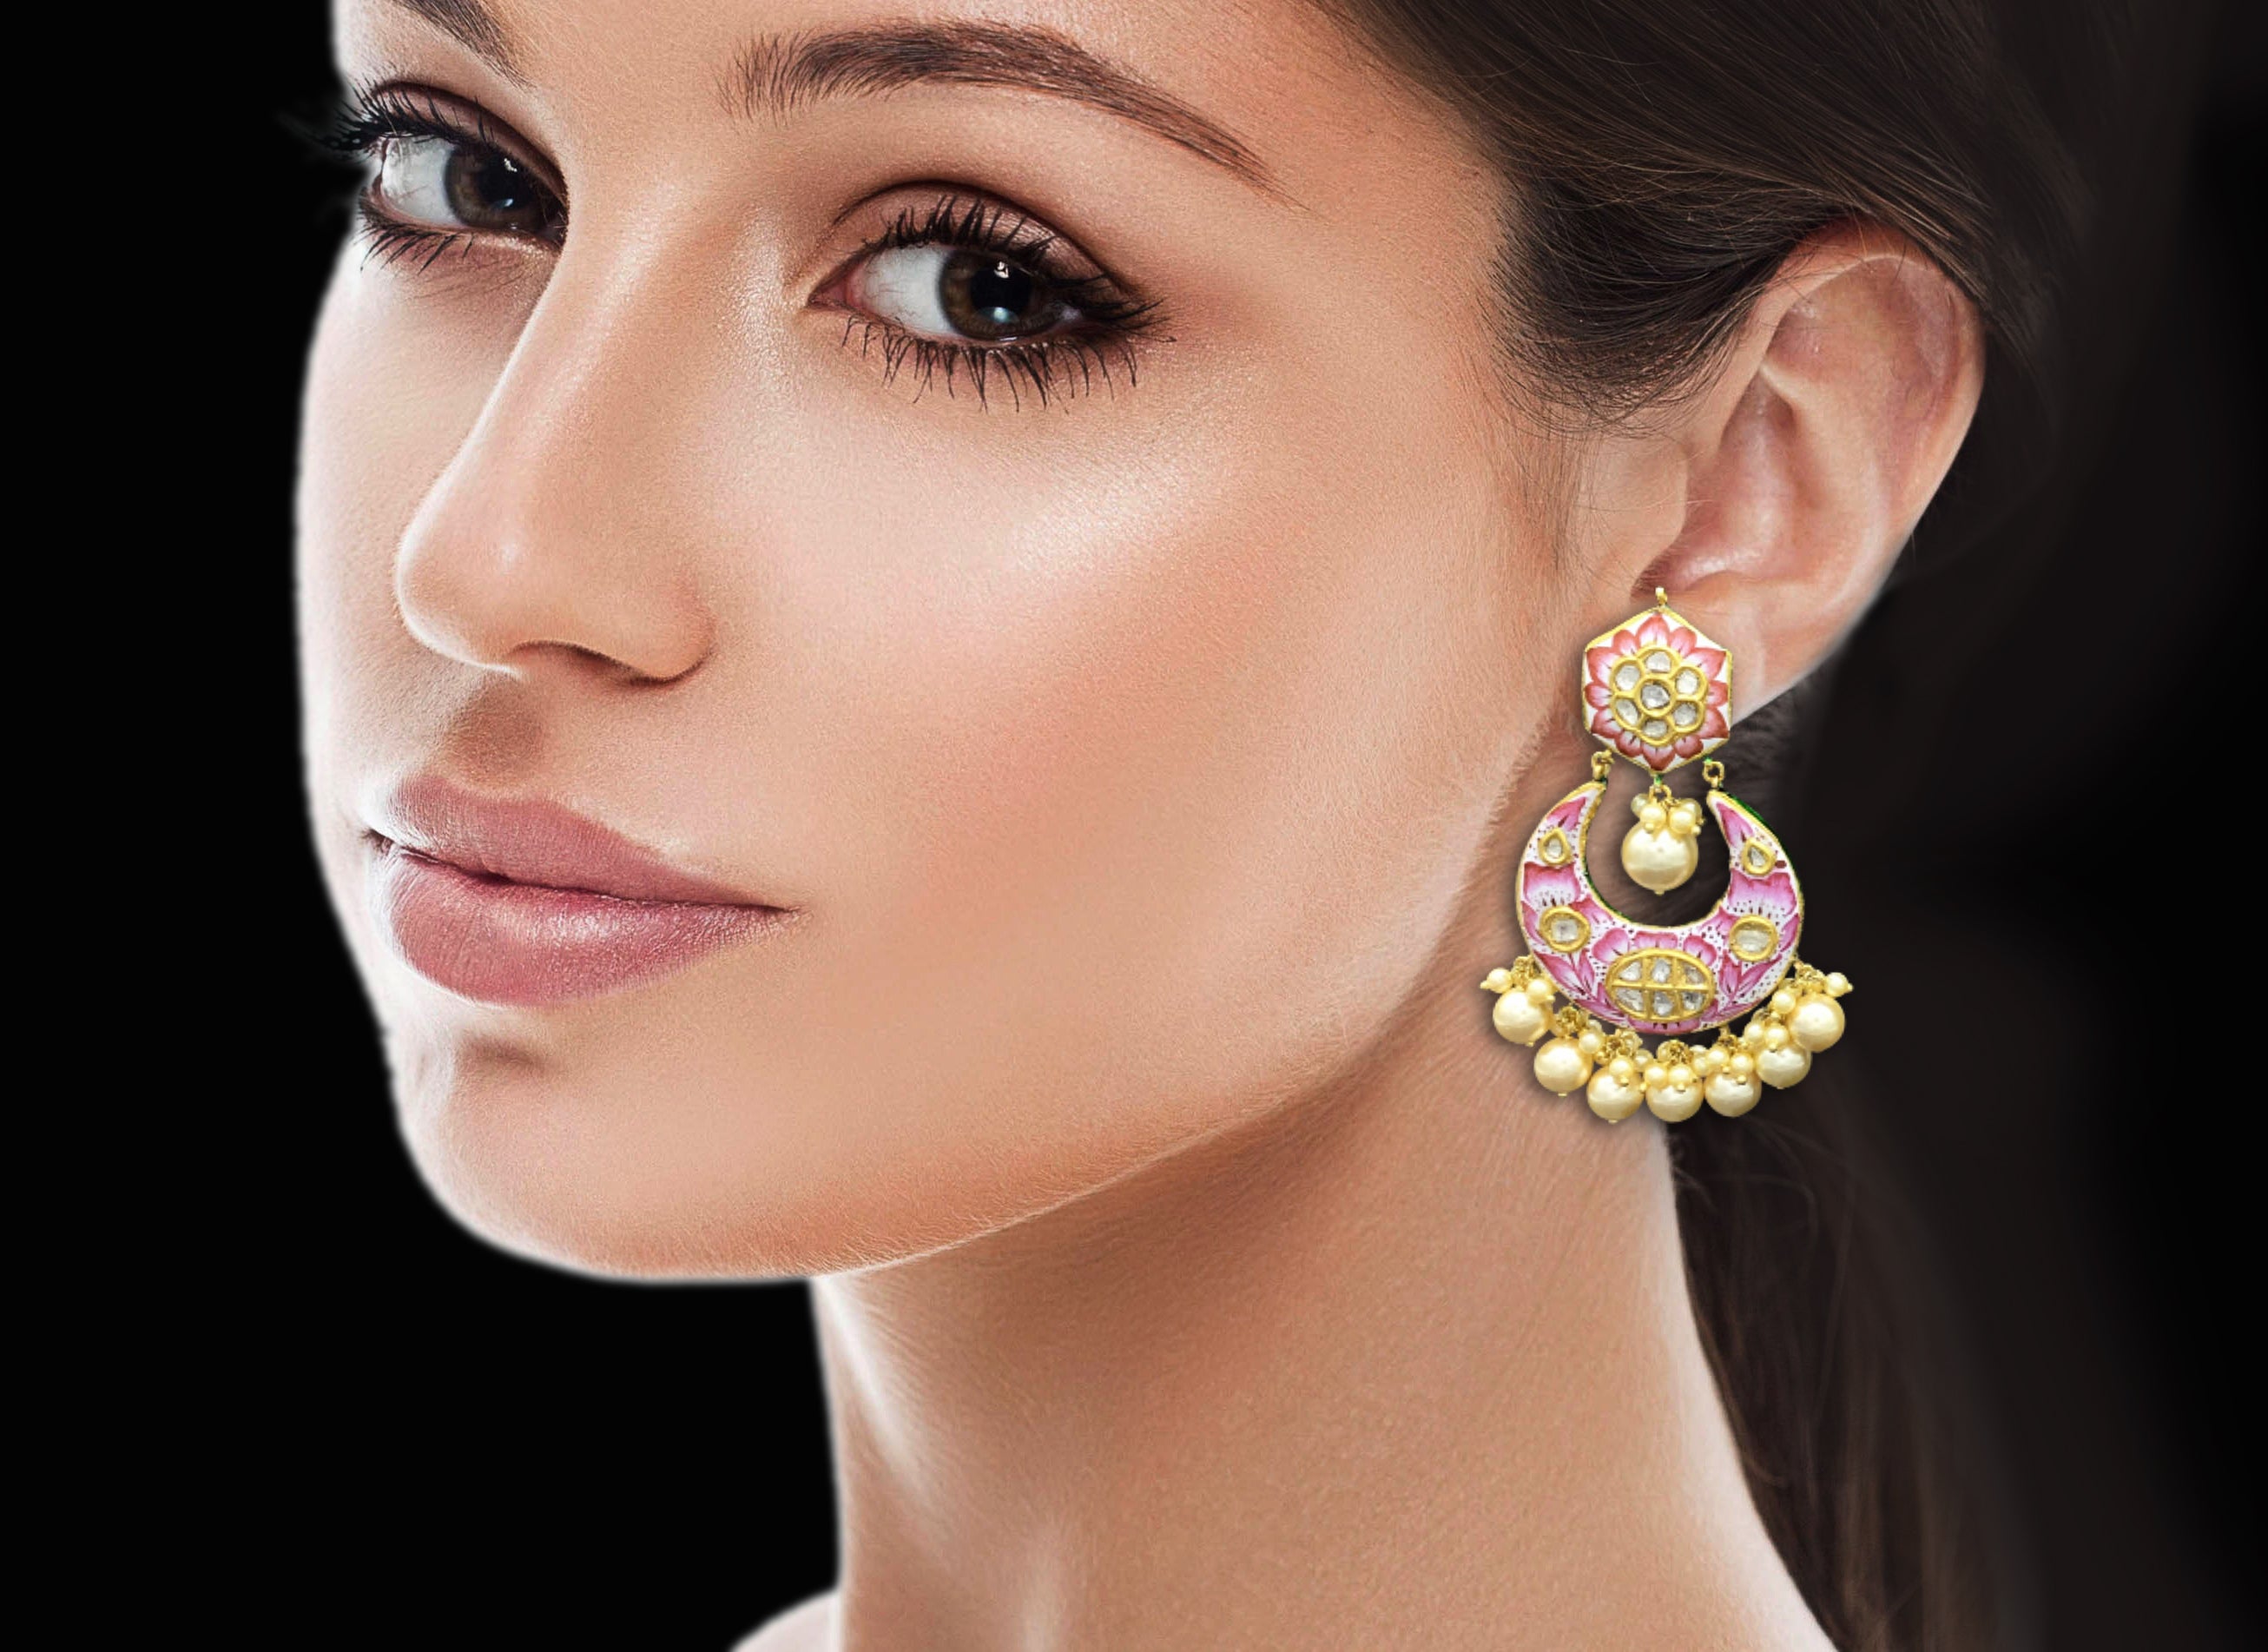 23k Gold and Diamond Polki Chand Bali Earring Pair with Pink Enamelling - G. K. Ratnam